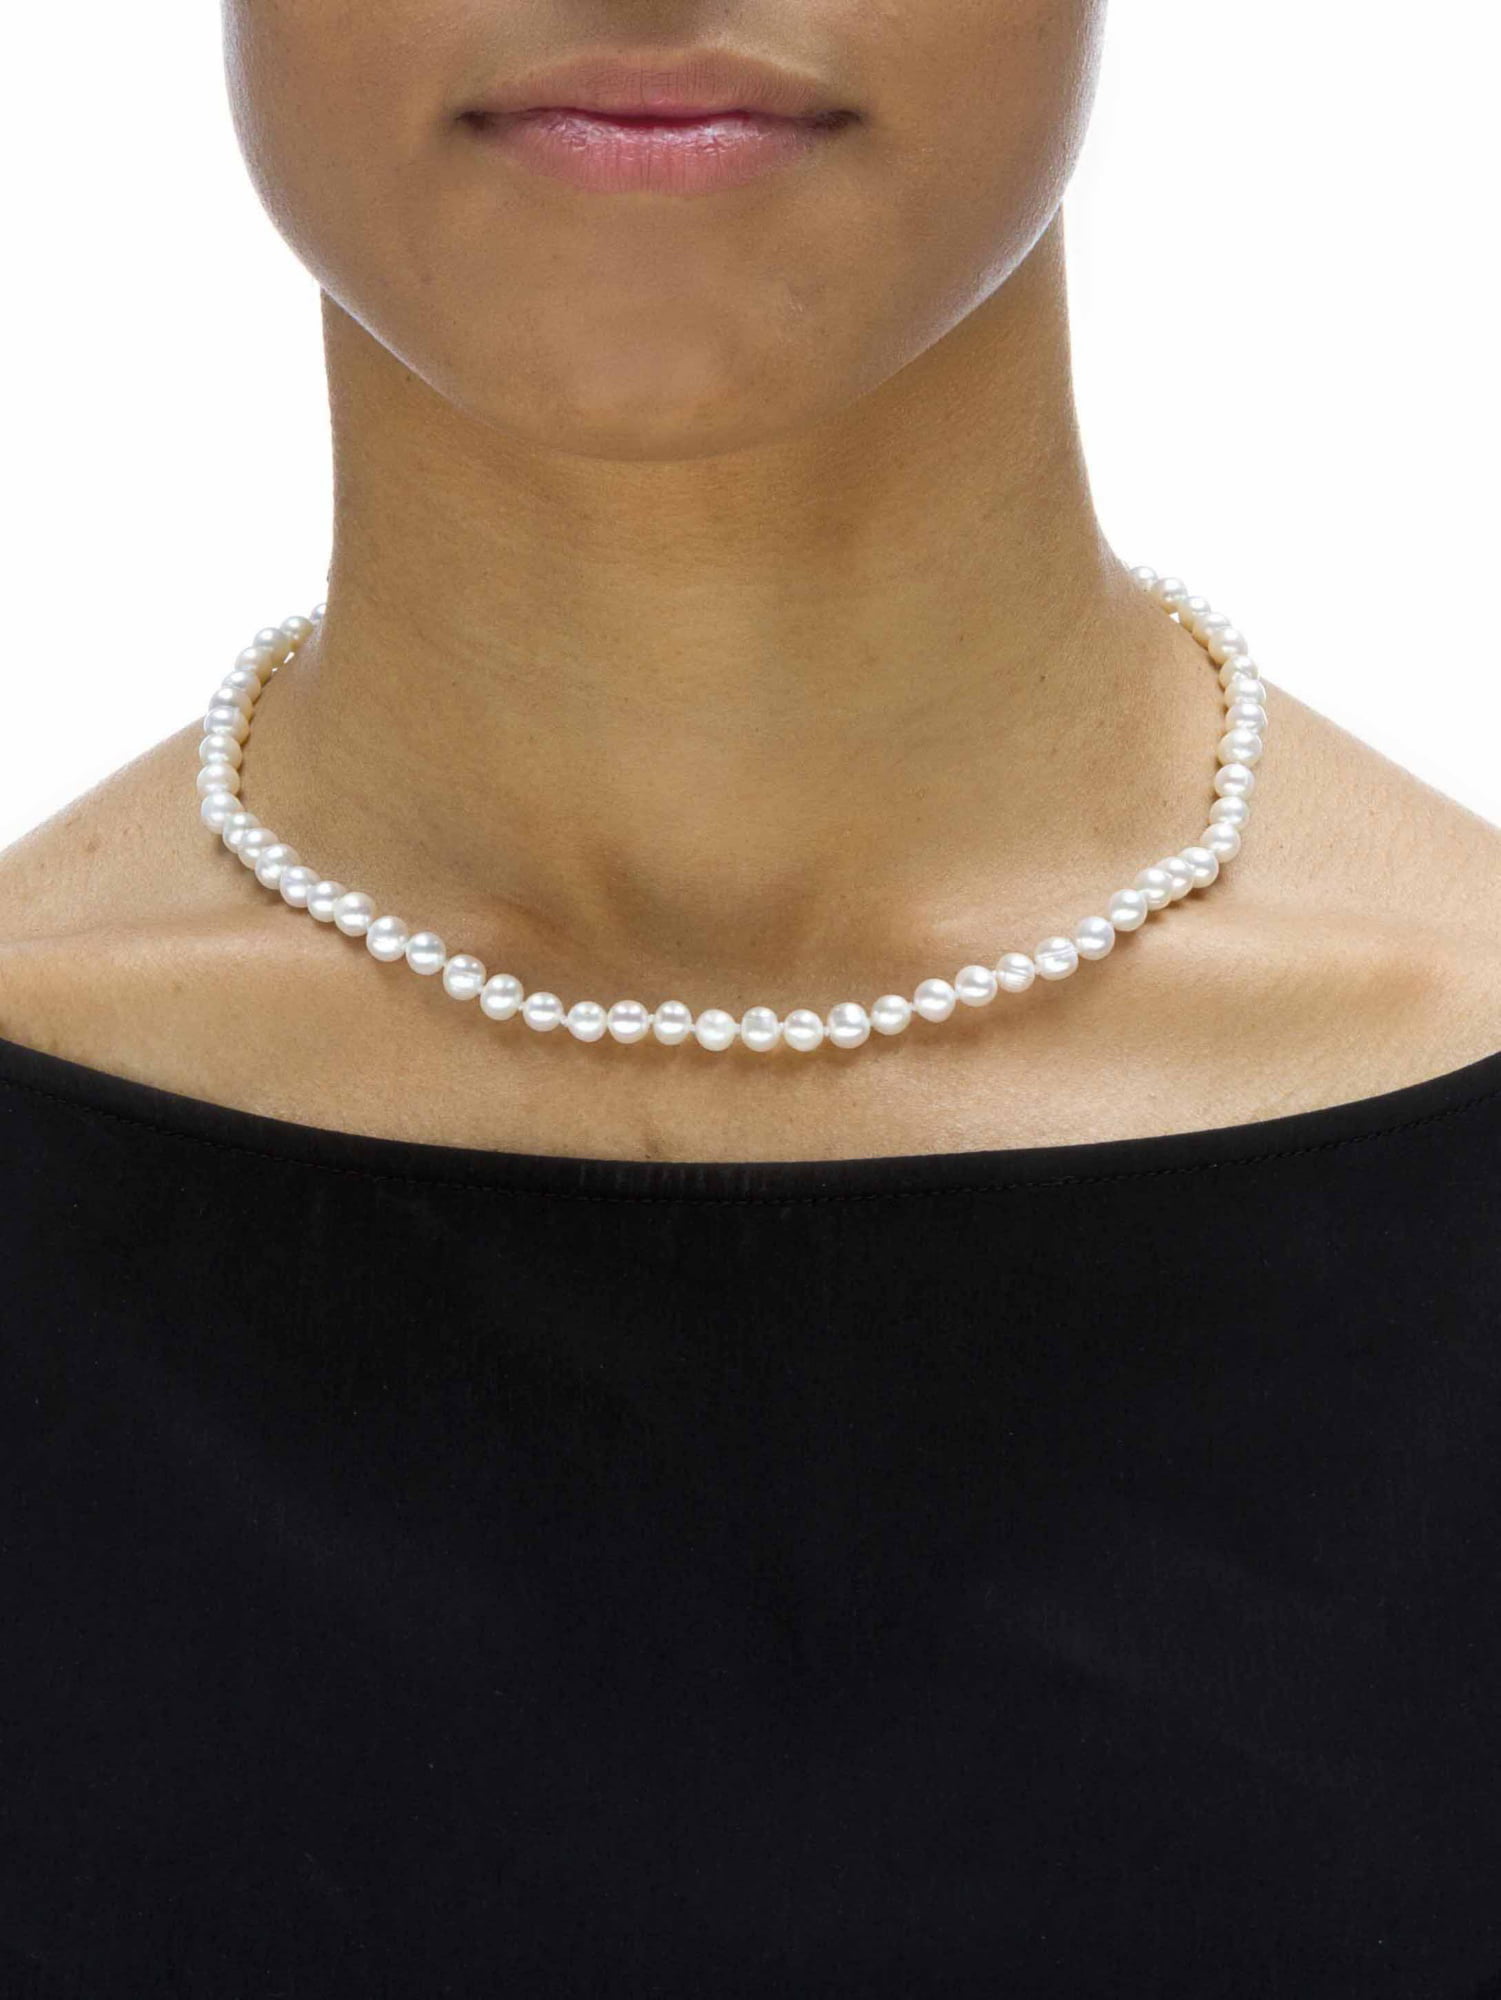 Freshwater Cultured Pearl Necklace Set with Bracelet Stud Earrings Jewelry for Women Girls 16 18 20 Inch ROUND Pearl 